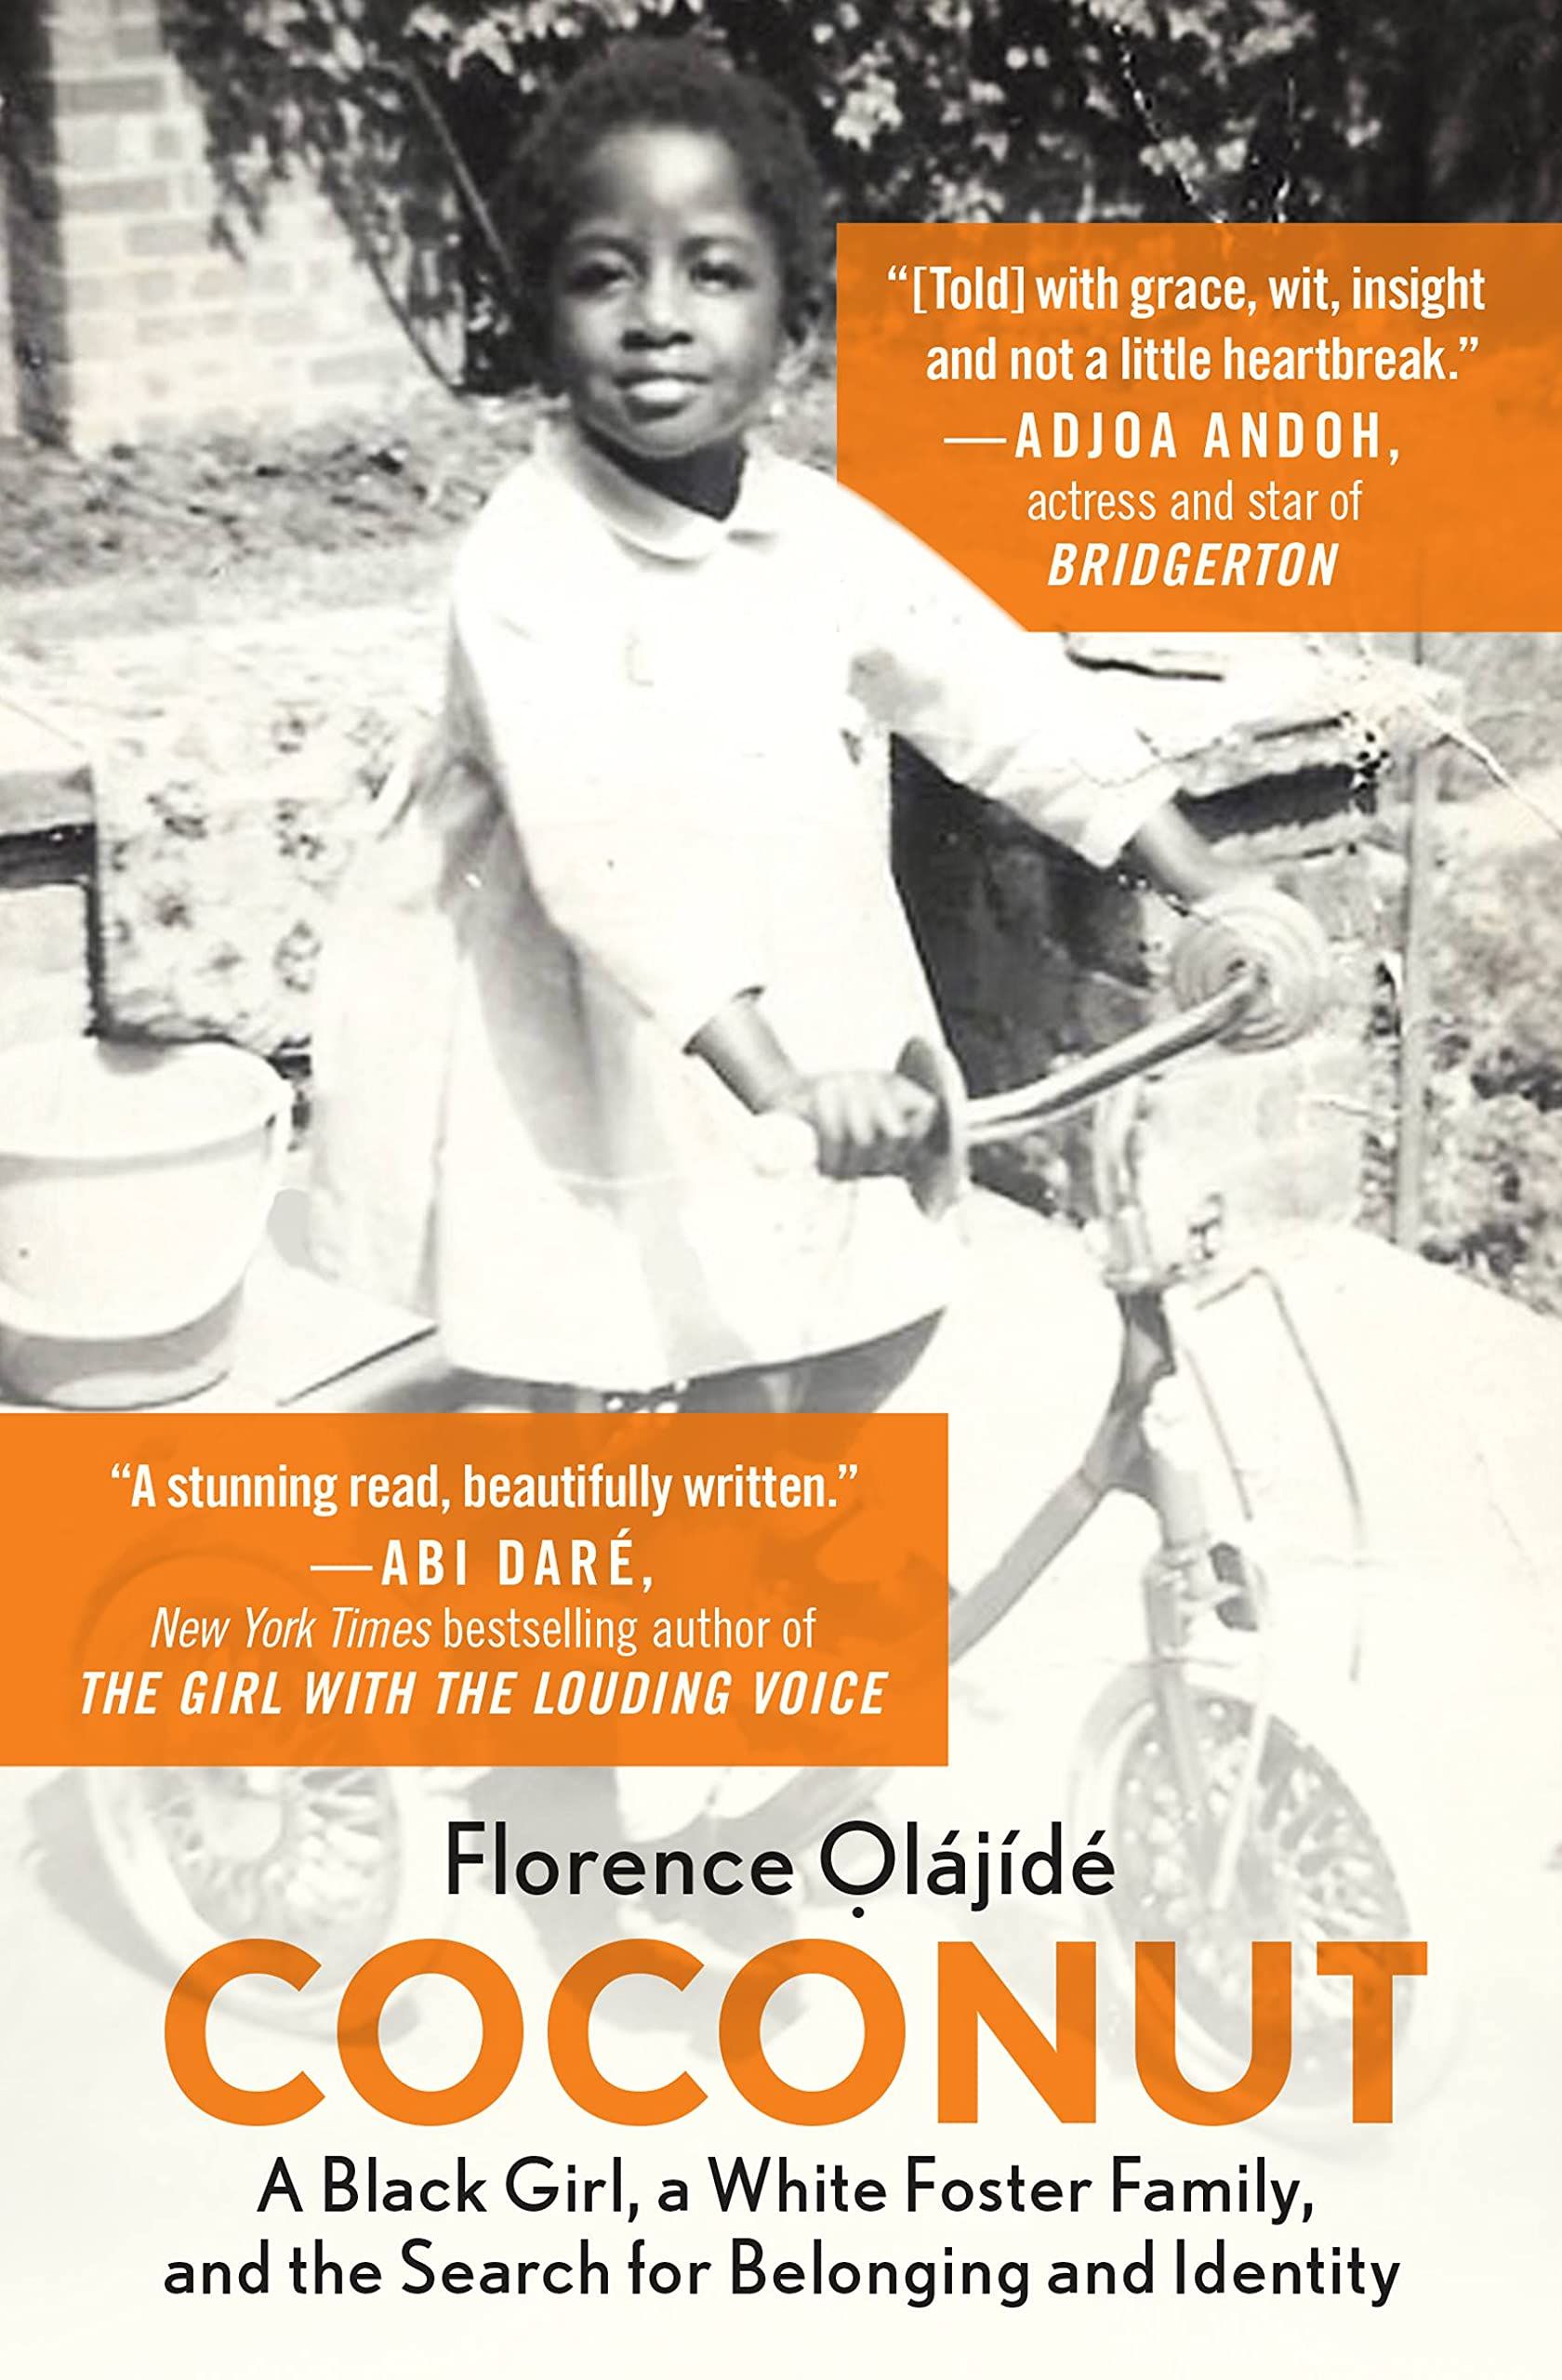 Book cover of Coconut by Florence Olajide